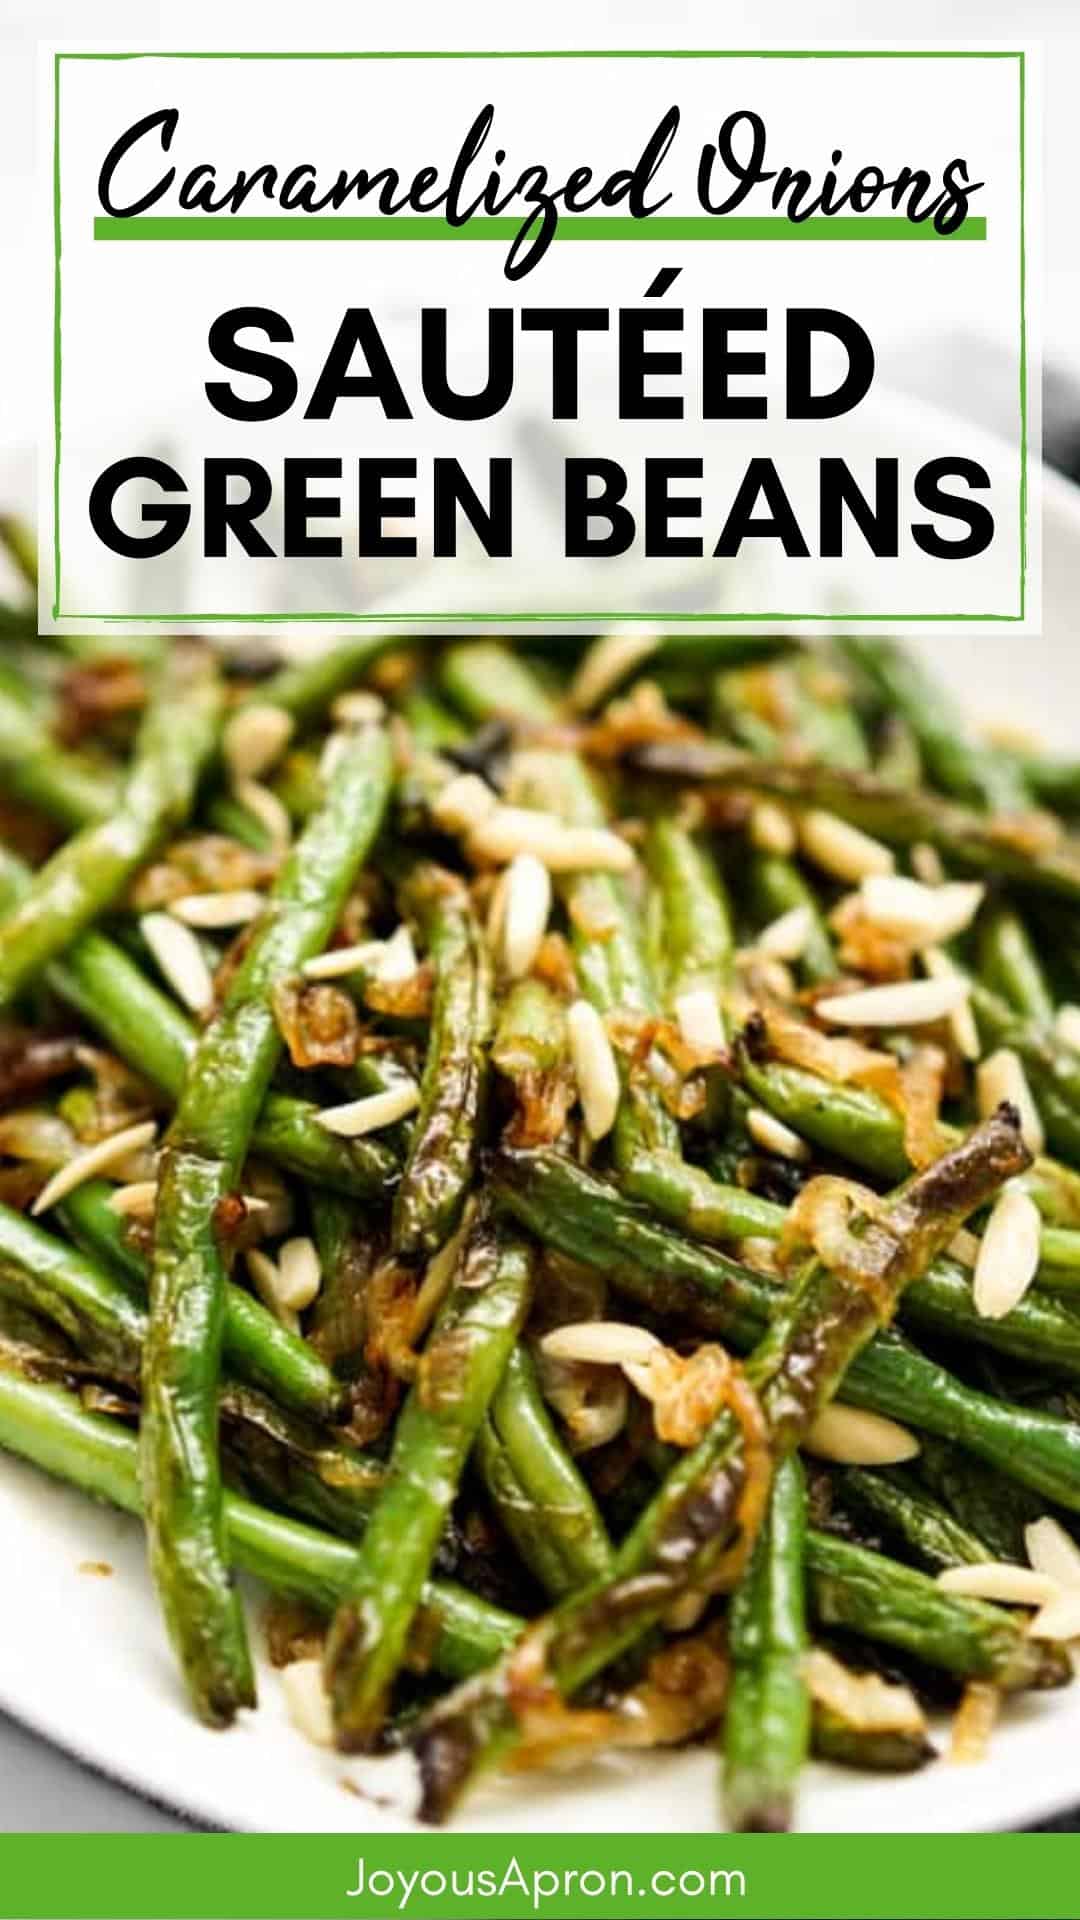 Green Beans with Caramelized Onions - A easy and delicious veggie side dish! Sweet caramelized onions sautéed with crunchy green beans, toss with garlic, butter, sea salt, then topped with shaved almonds.  via @joyousapron